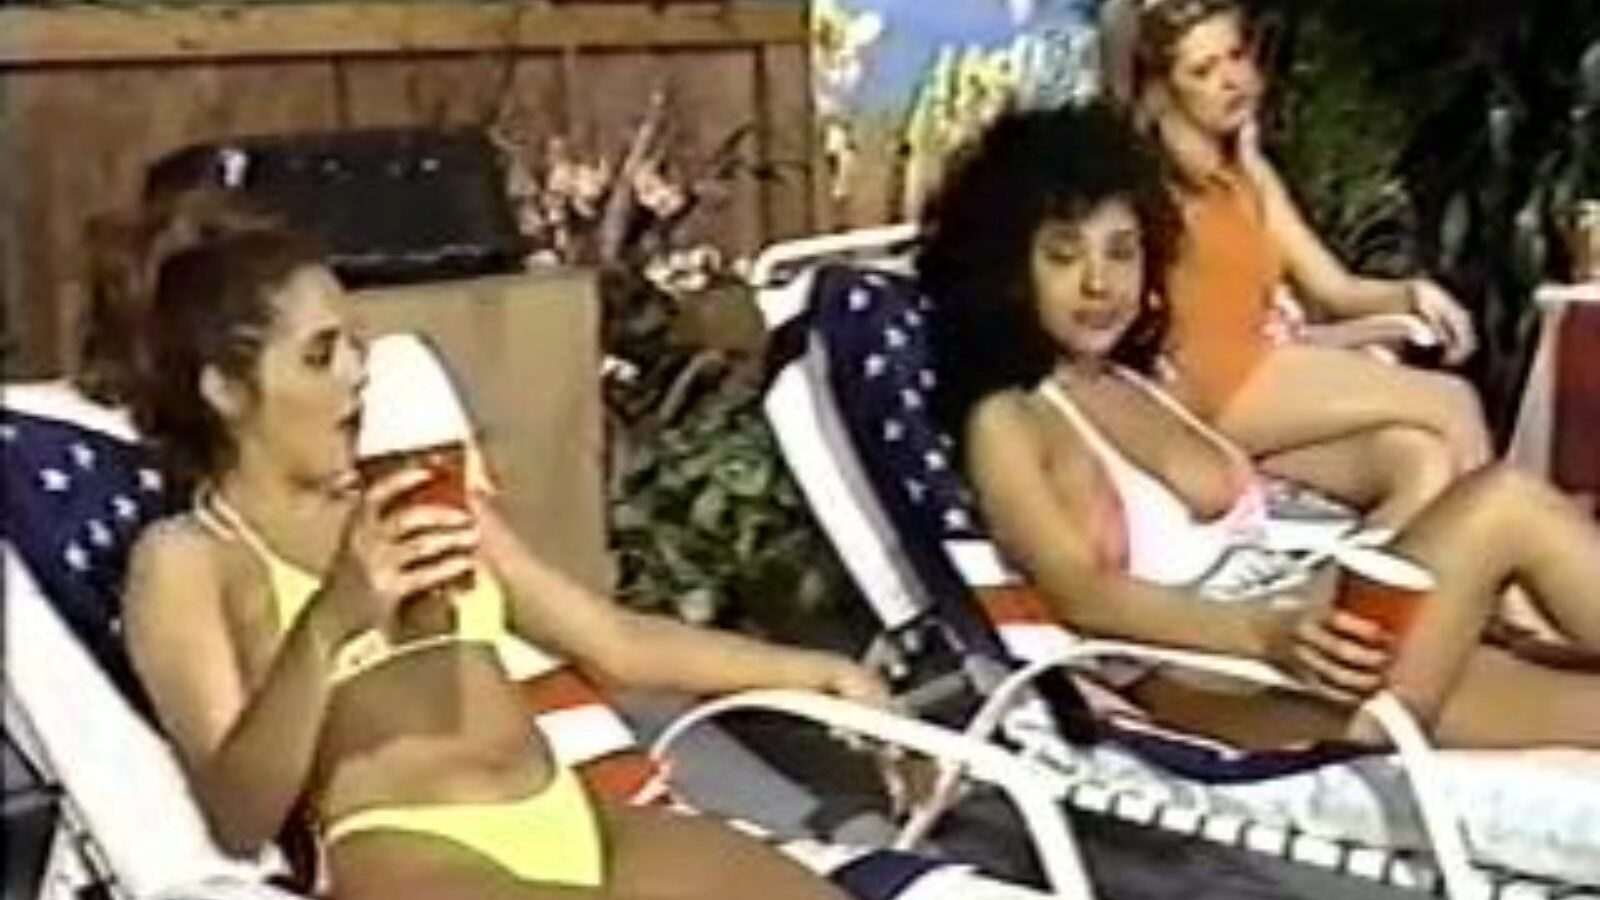 retro usa 693 90s: free 1992 porn video 0c - xhamster watch retro usa 693 90s tube fuck-a-thon episode for free-for-all on xhamster, με την πιο σέξι συλλογή του 1992, 90s retro, δωρεάν usa & usa δωρεάν ταινία πορνό ακολουθίες σκηνών